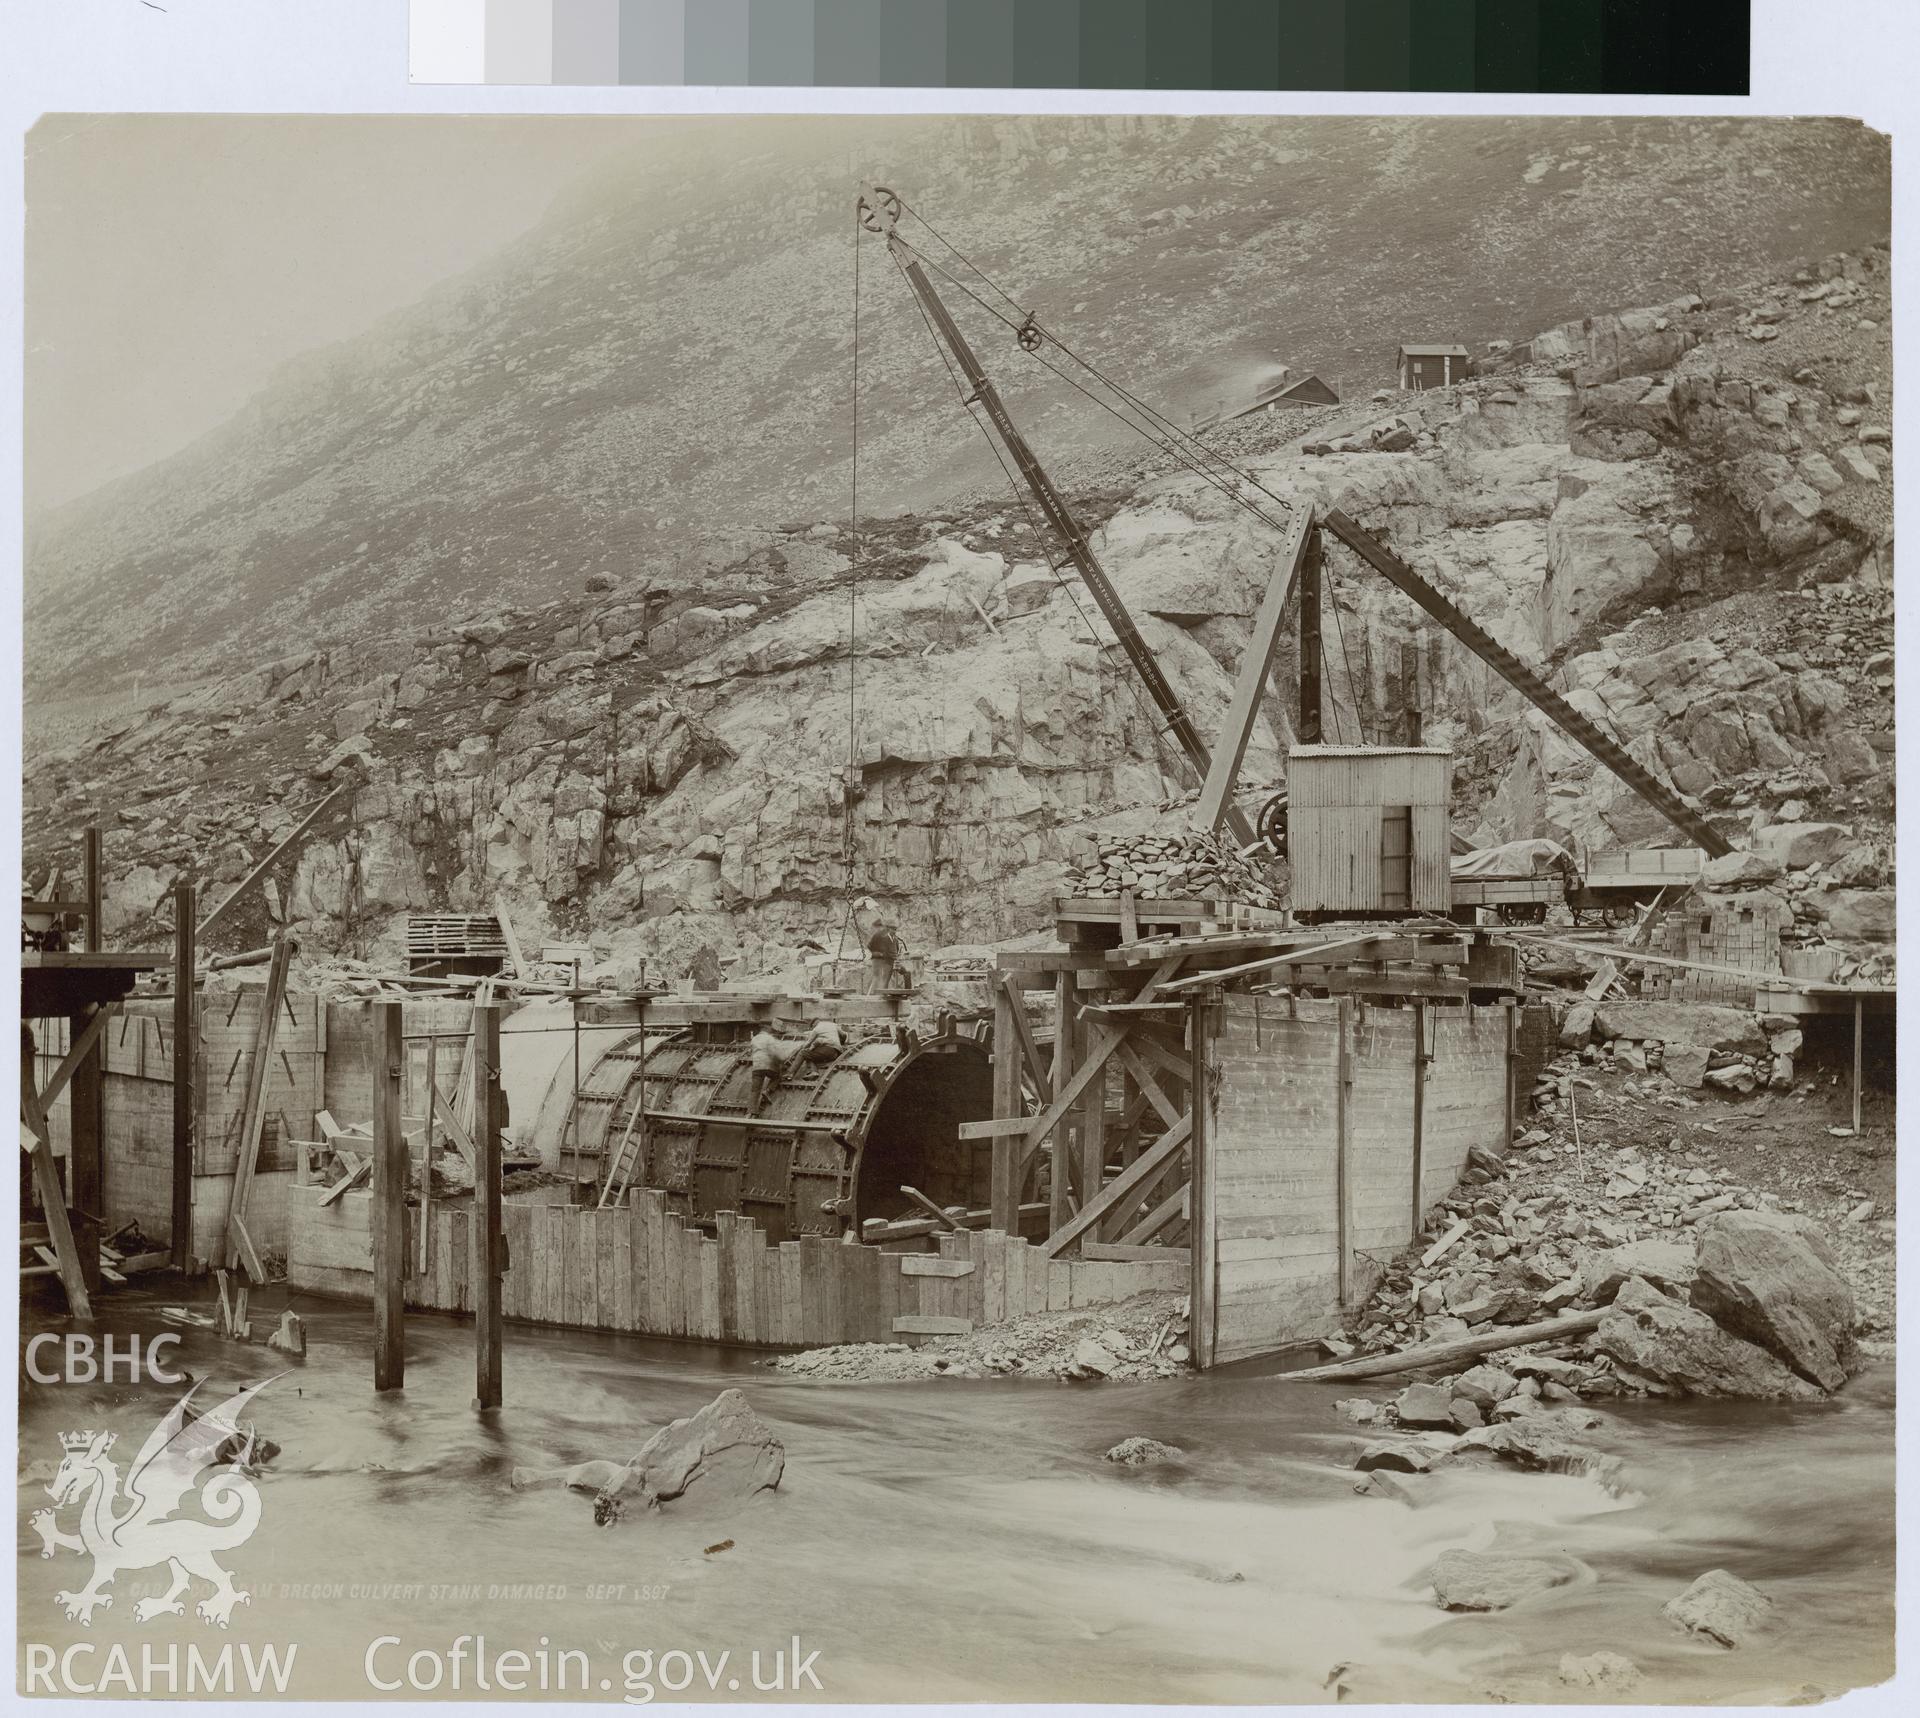 Digital copy of an albumen print from Edward Hubbard Collection showing Caban Coch Dam, with Brecon culvert stank damage, taken September 1897.